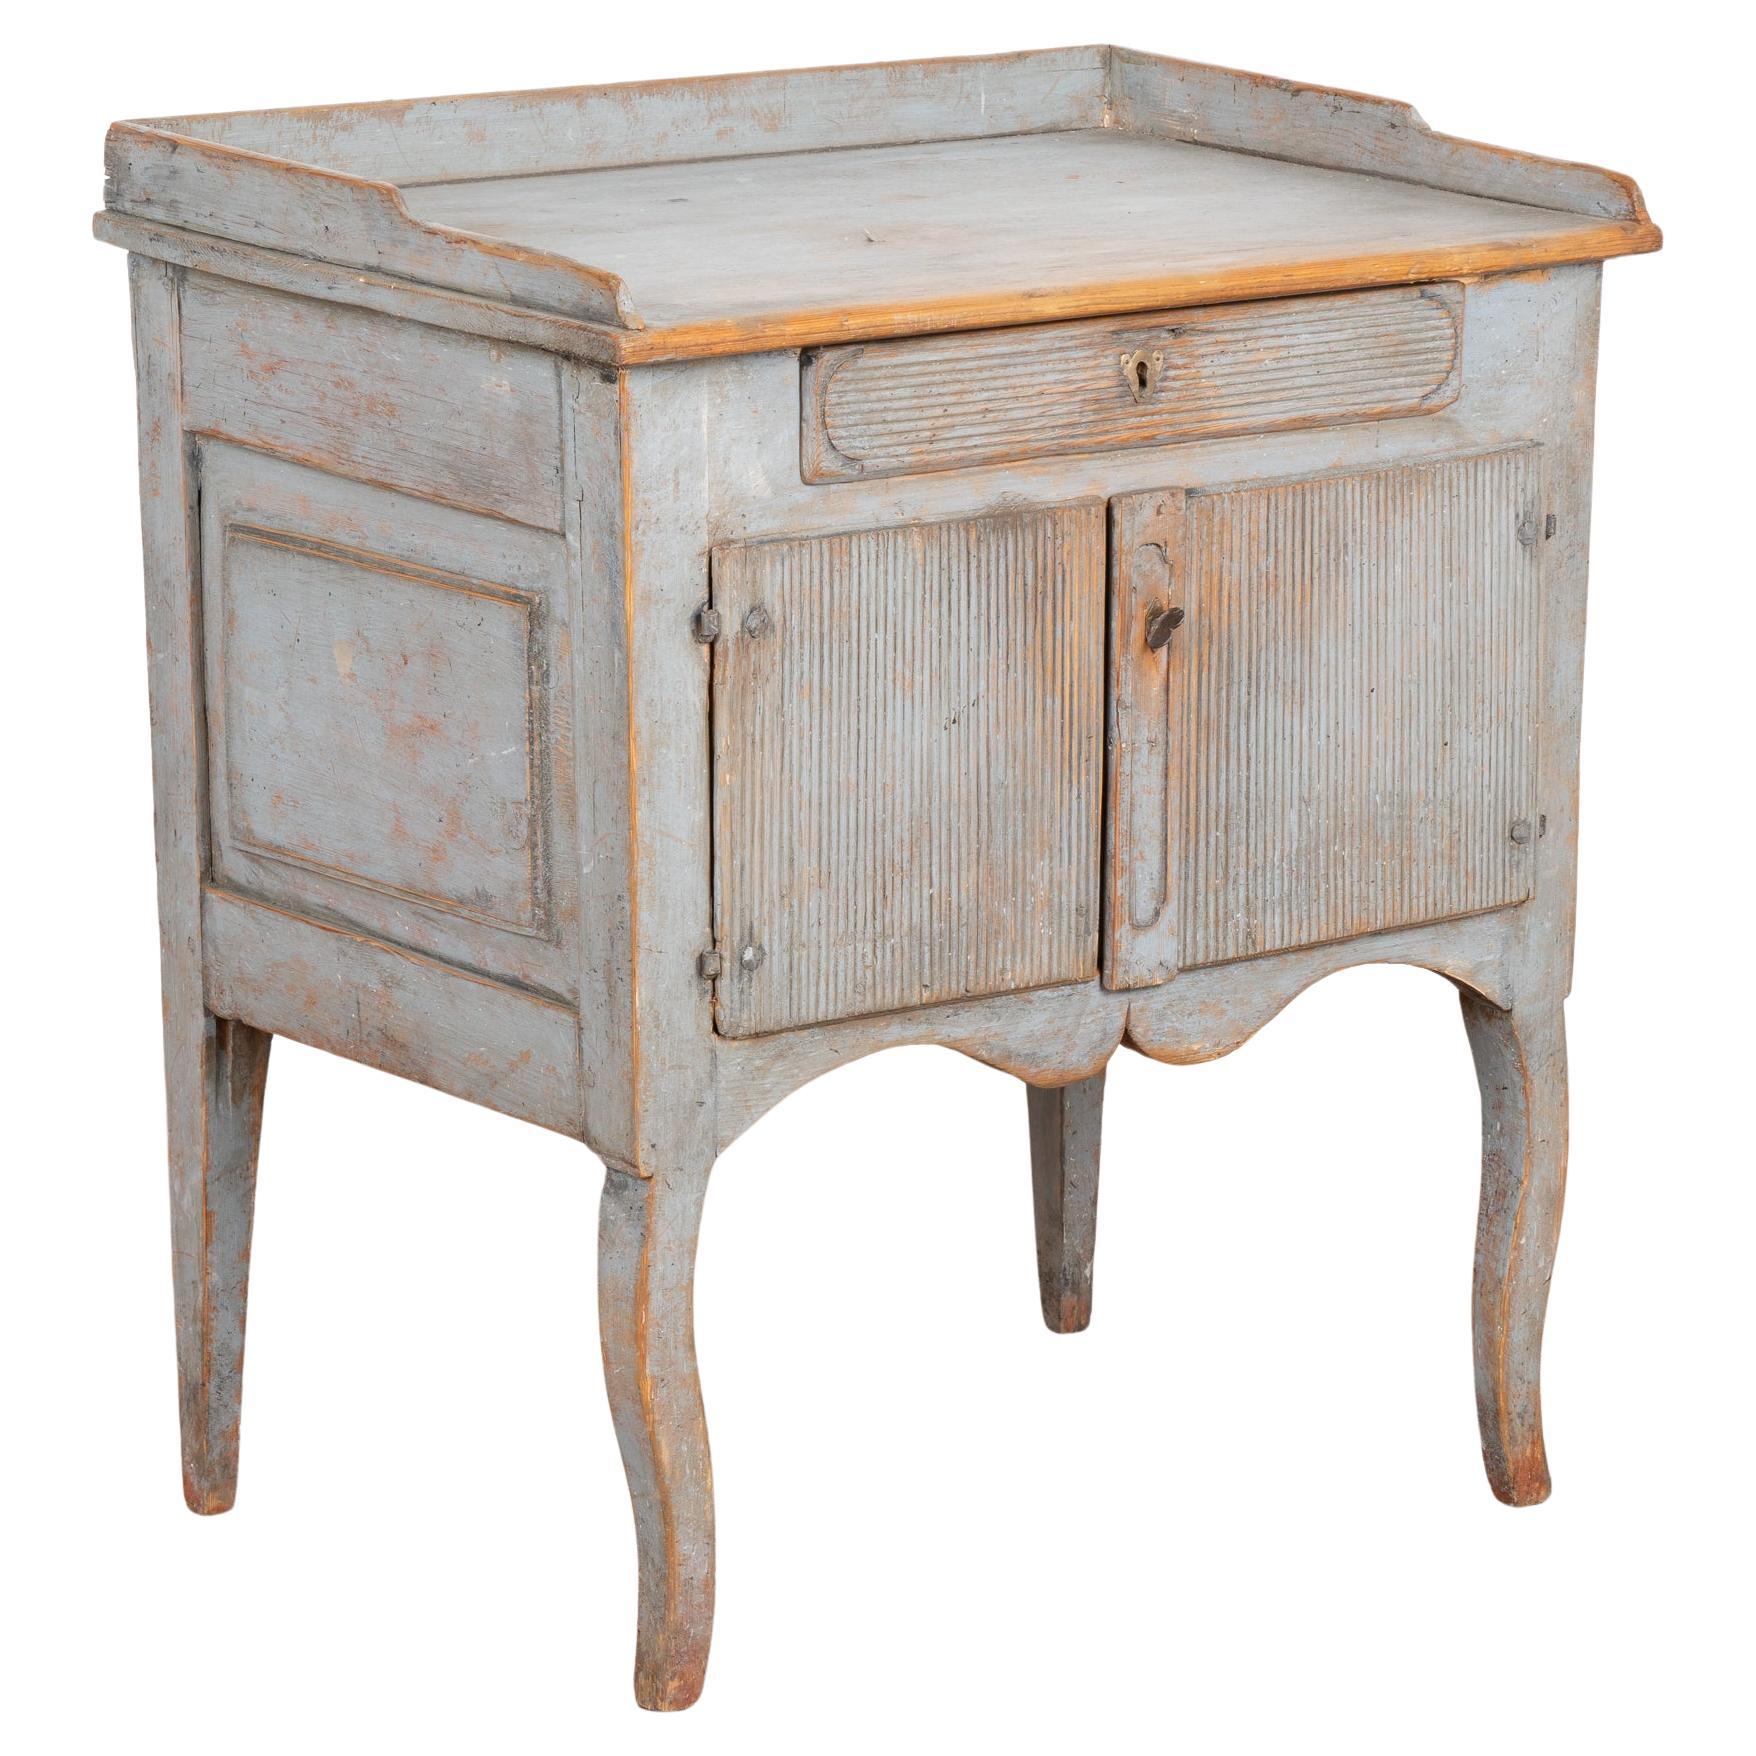 Original Blue Painted Small Cabinet or Nightstand, Sweden circa 1860-80 For Sale